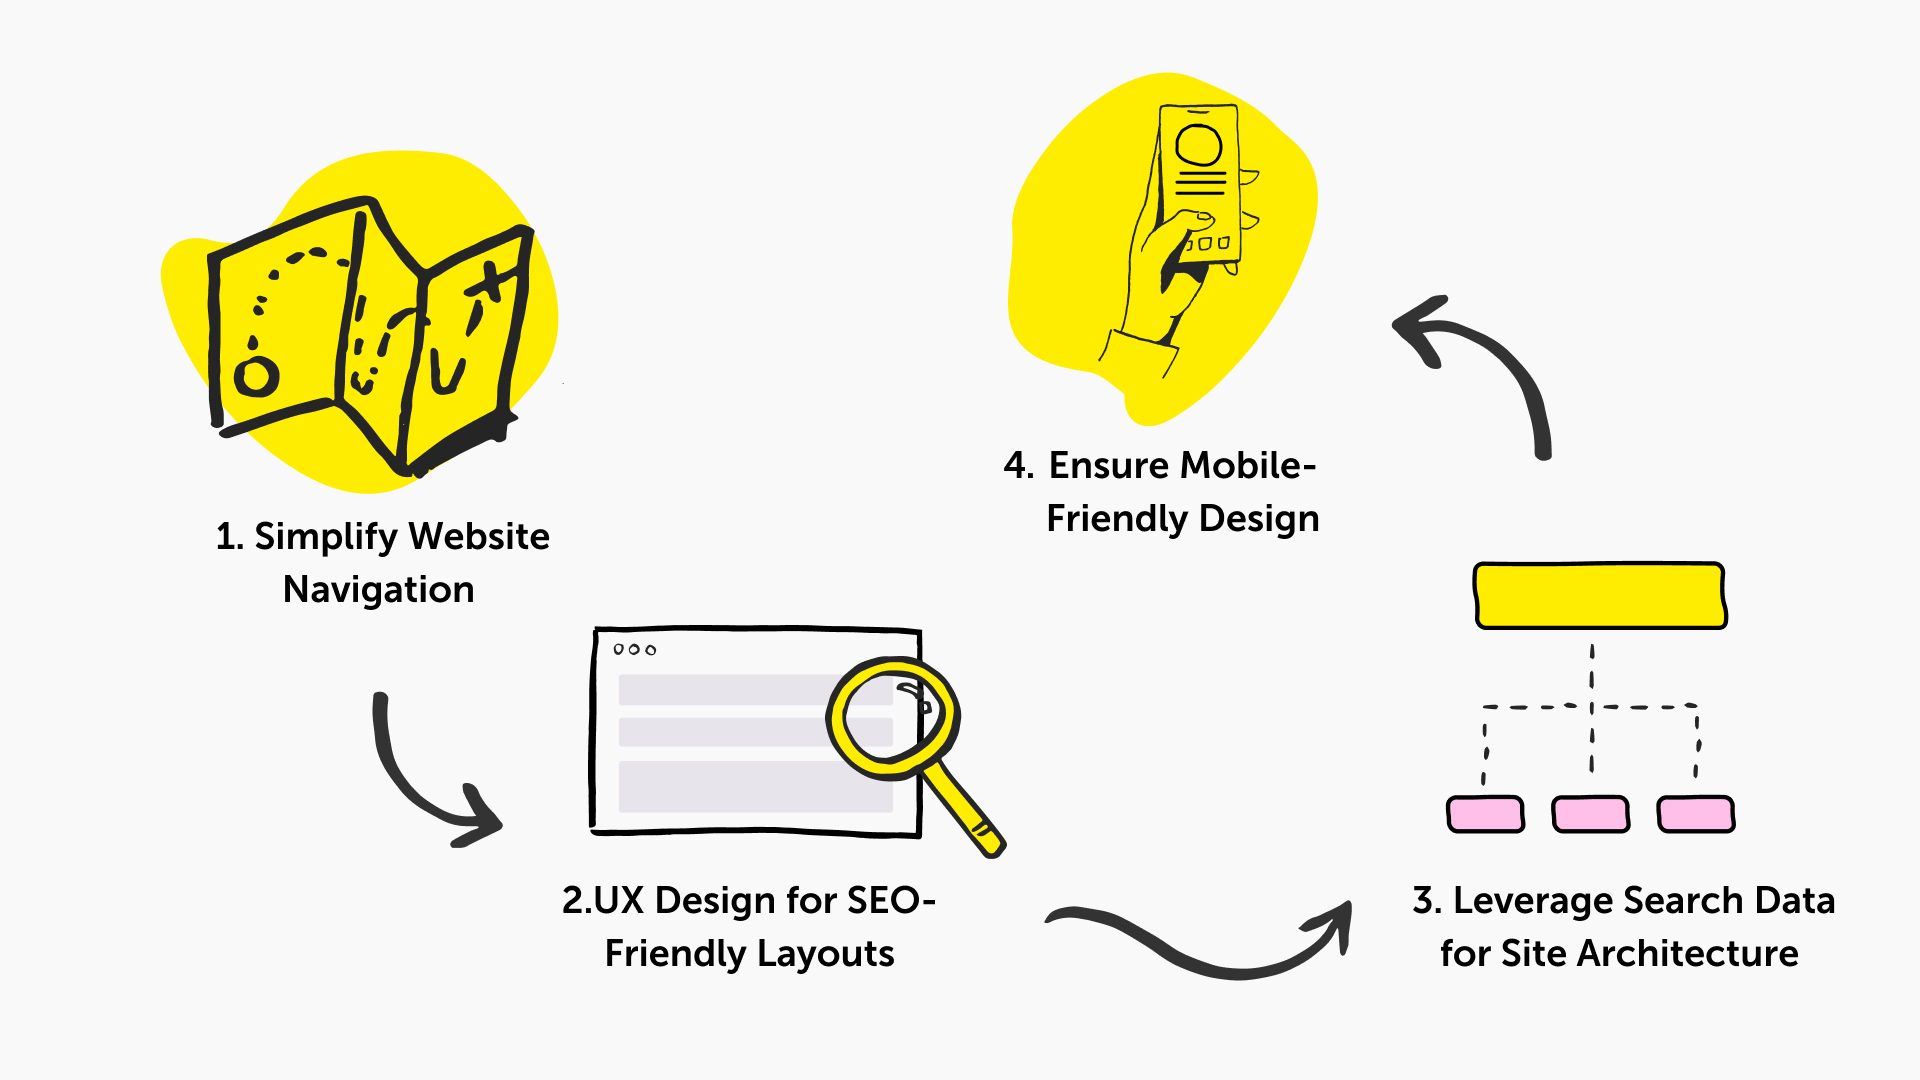 An infographic with four key UX design principles for enhancing SEO: 1. Simplify Website Navigation, with an icon of a map. 2. UX Design for SEO-Friendly Layouts, depicted by a magnifying glass over a webpage layout. 3. Leverage Search Data for Site Architecture, indicated by a flowchart. 4. Ensure Mobile-Friendly Design, represented by a hand holding a mobile phone.